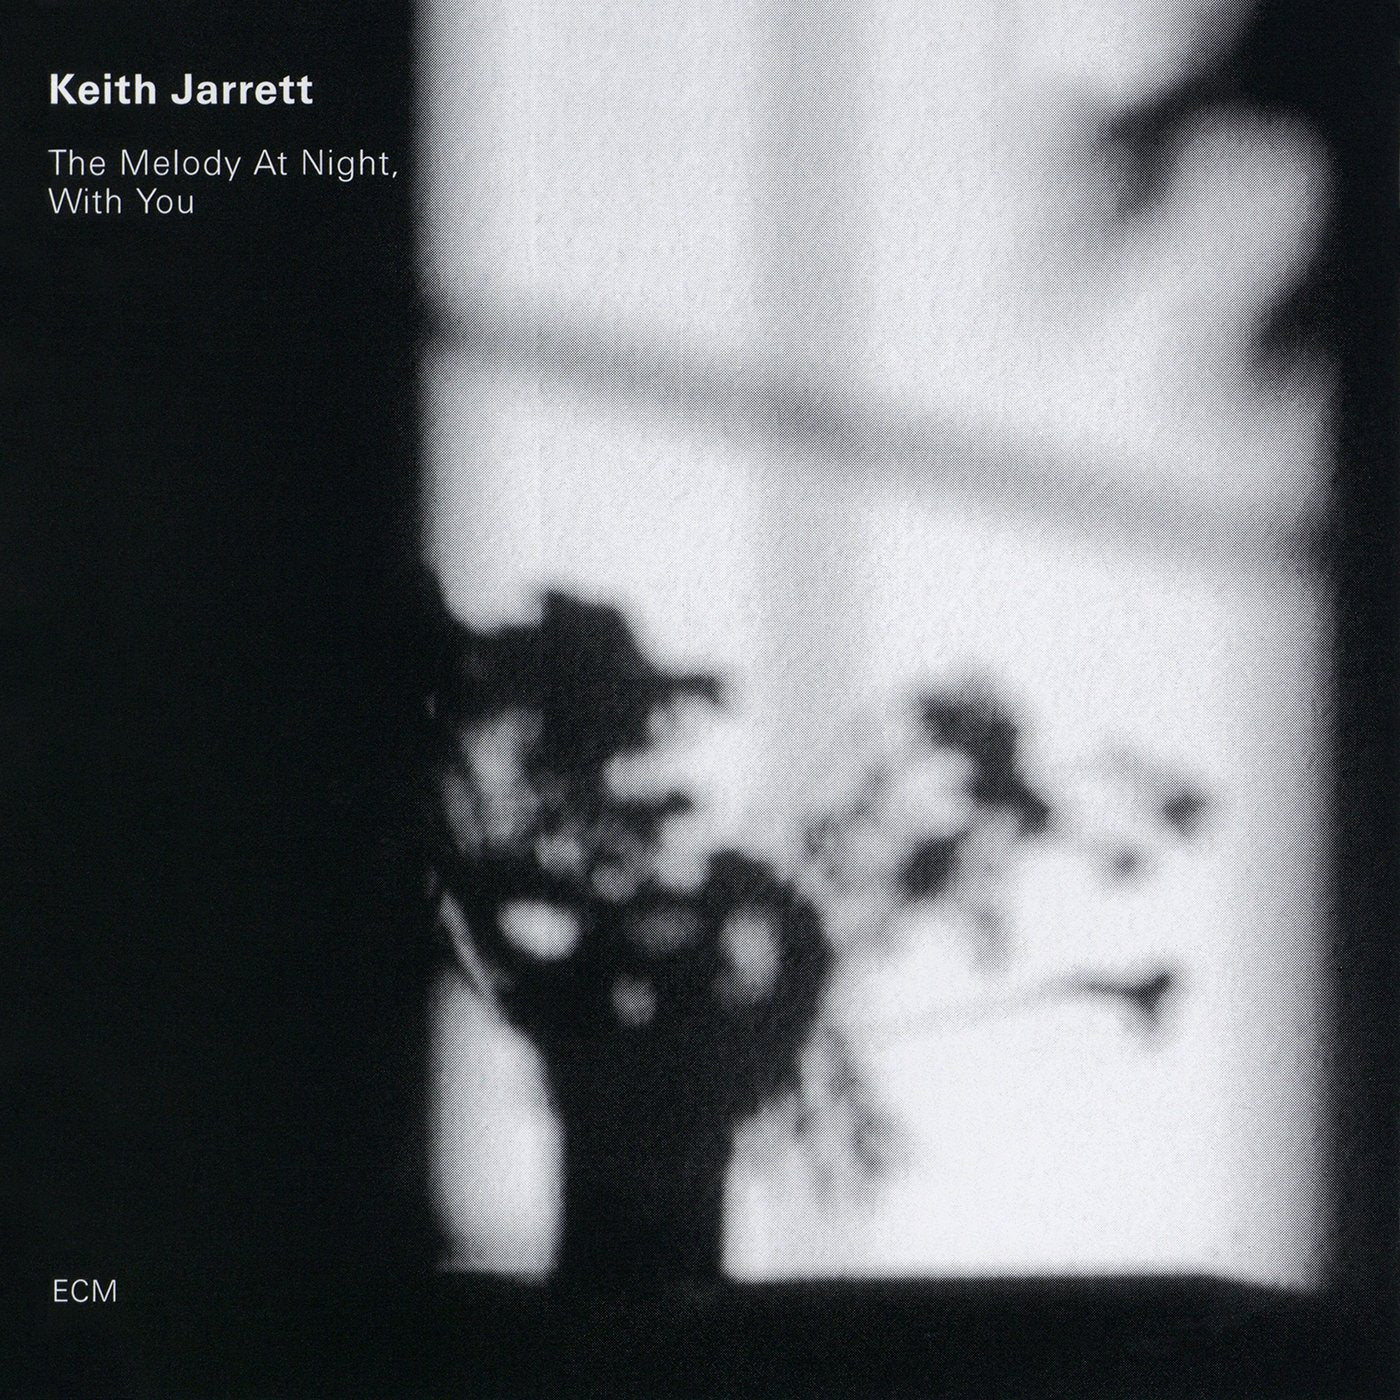 Keith Jarrett - The Melody At Night, With You - Vinyle